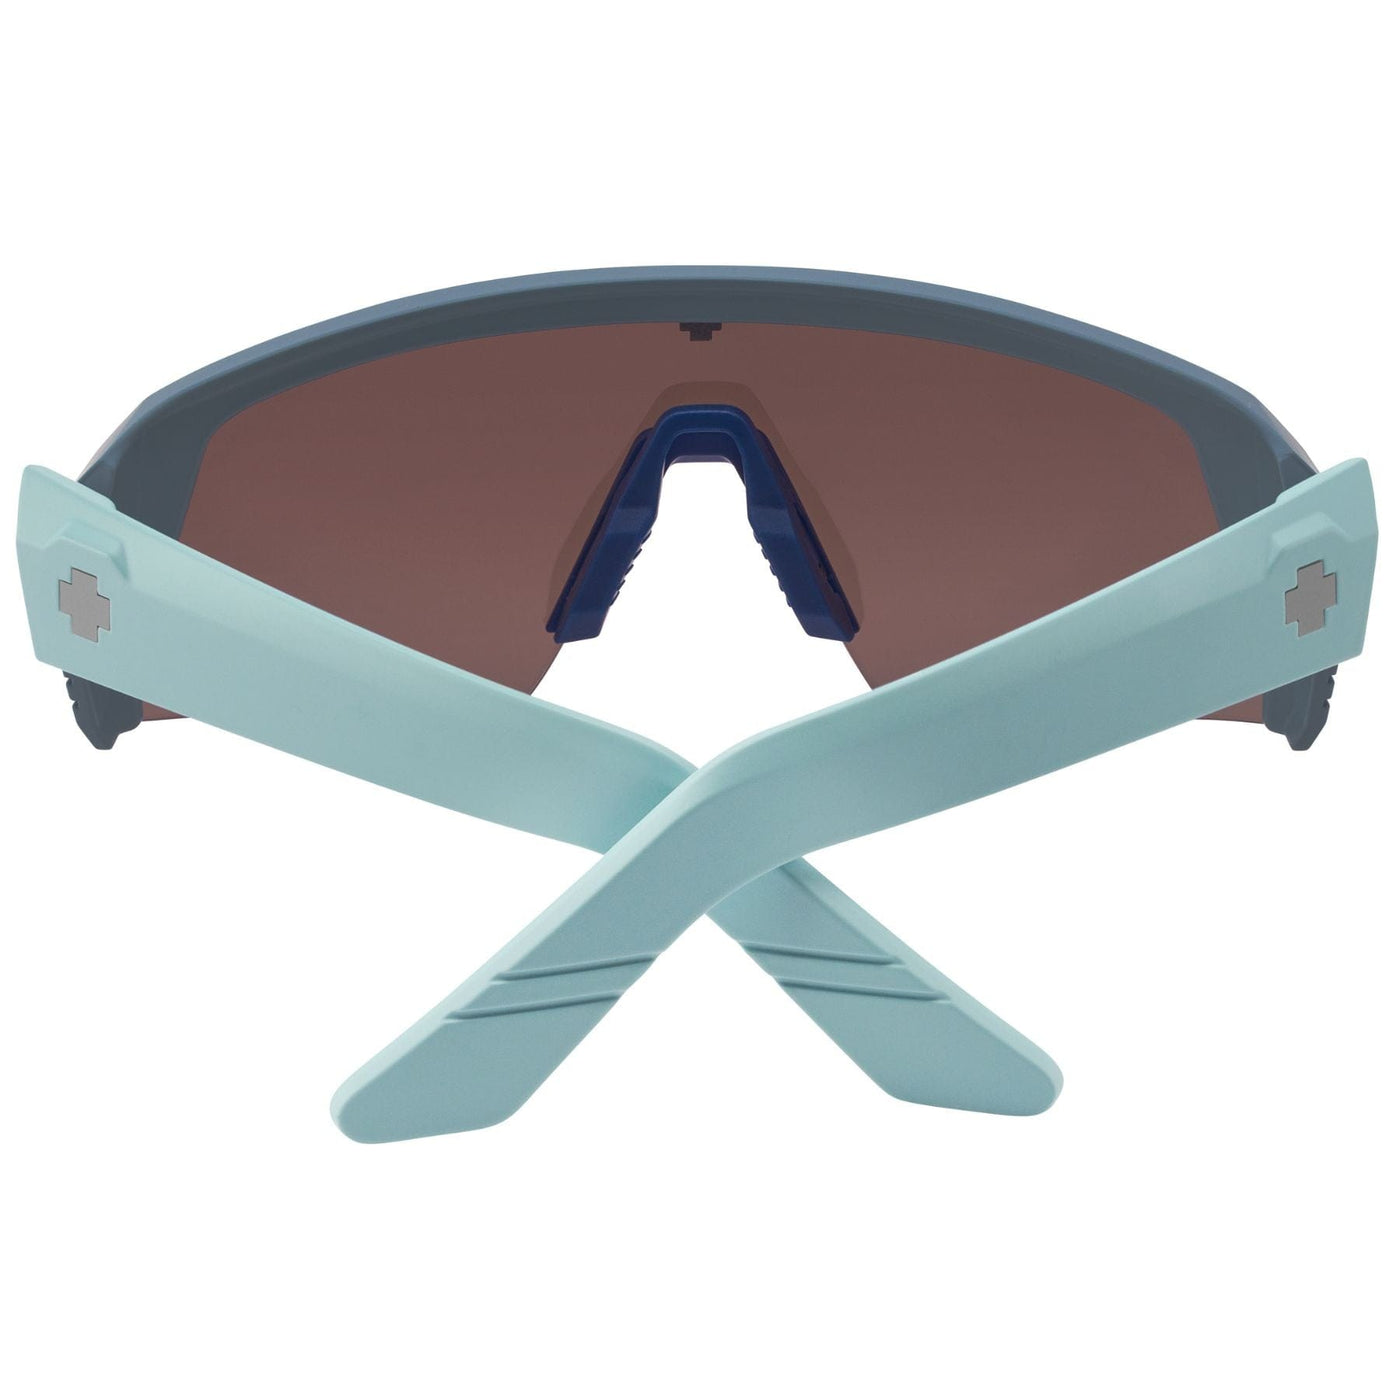 MONOLITH SPEED Polarized Sunglasses, Happy Boost - Blue 8Lines Shop - Fast Shipping